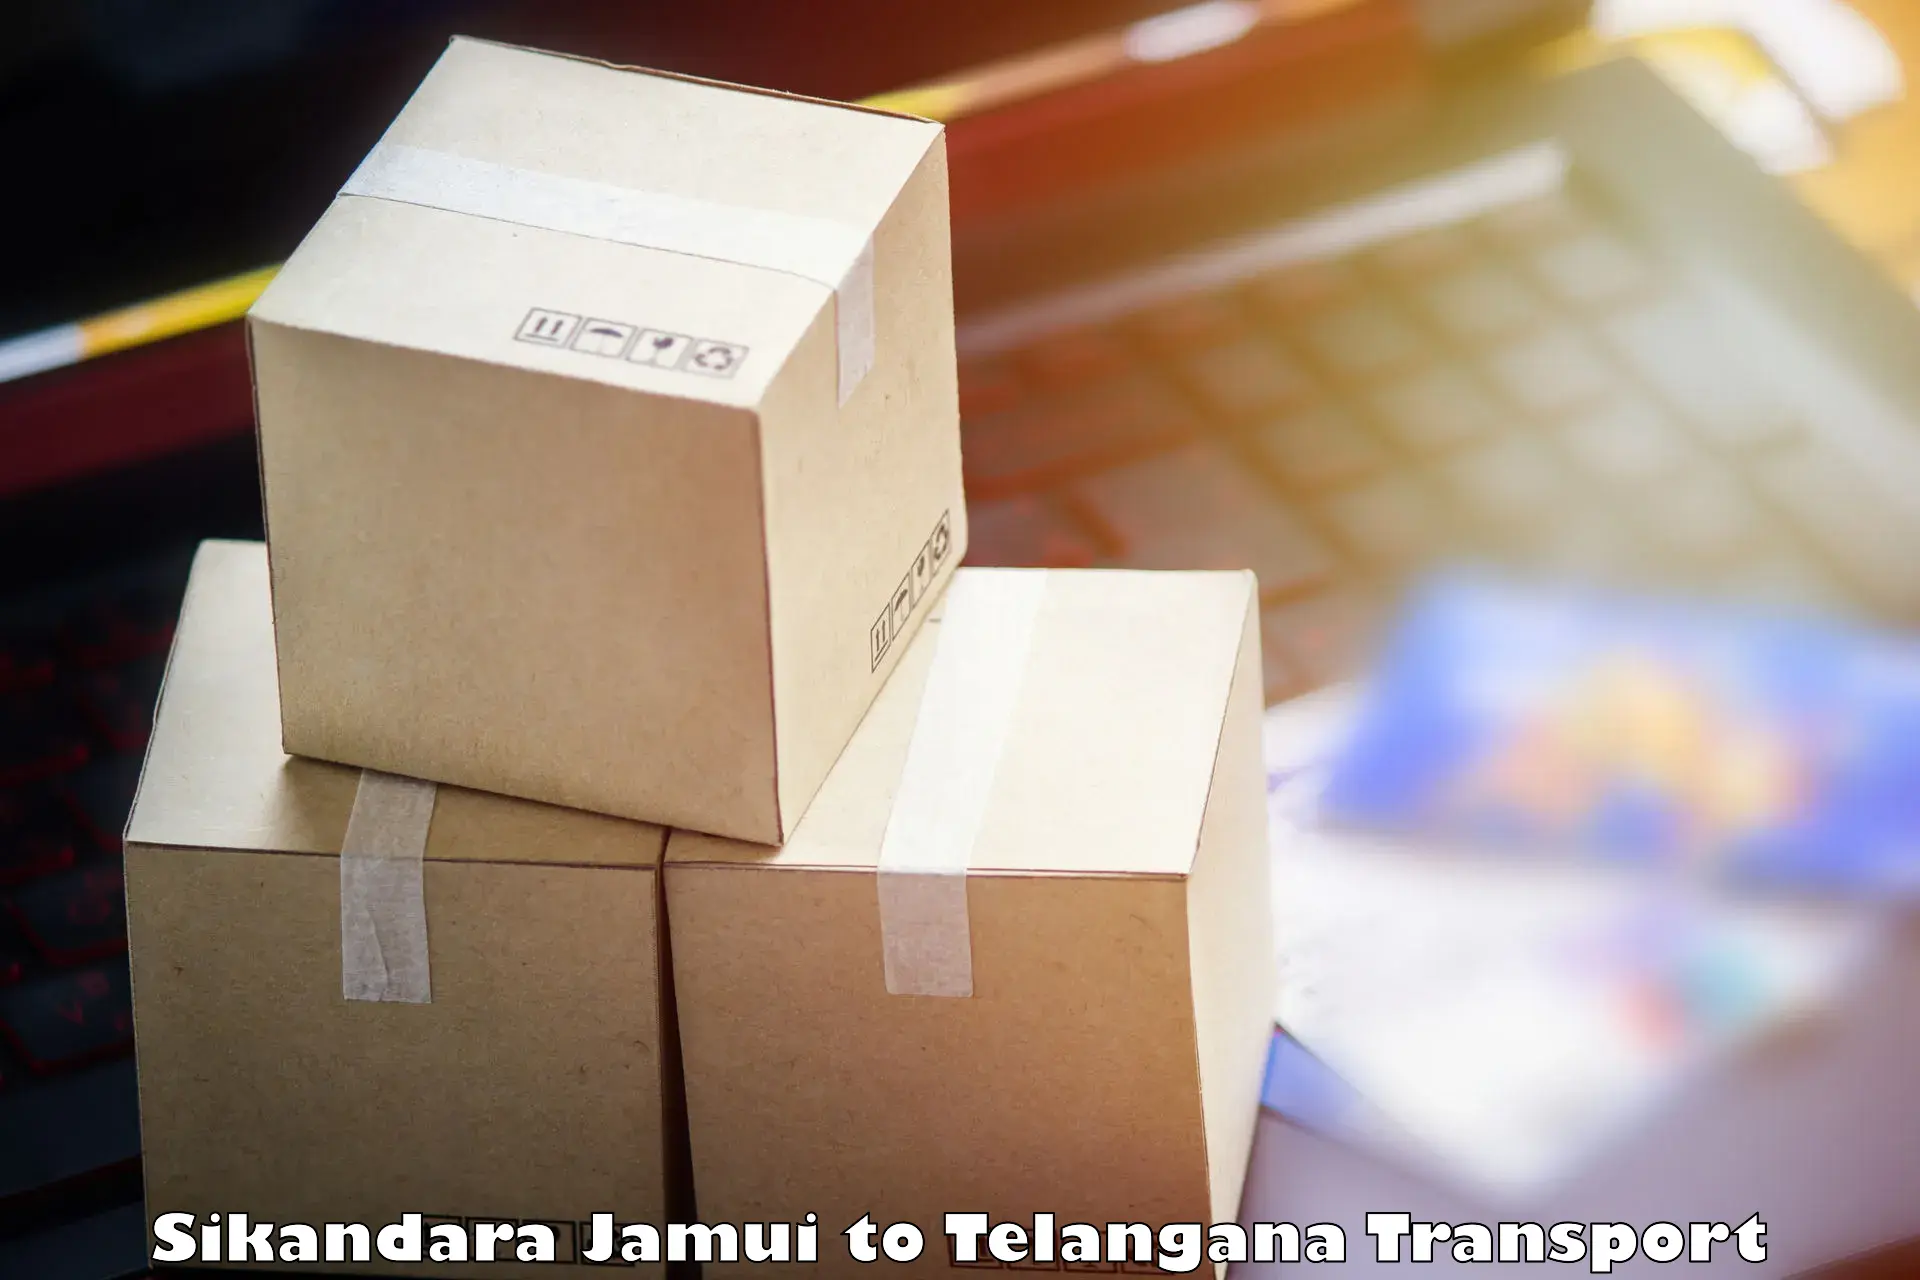 Package delivery services Sikandara Jamui to Telangana